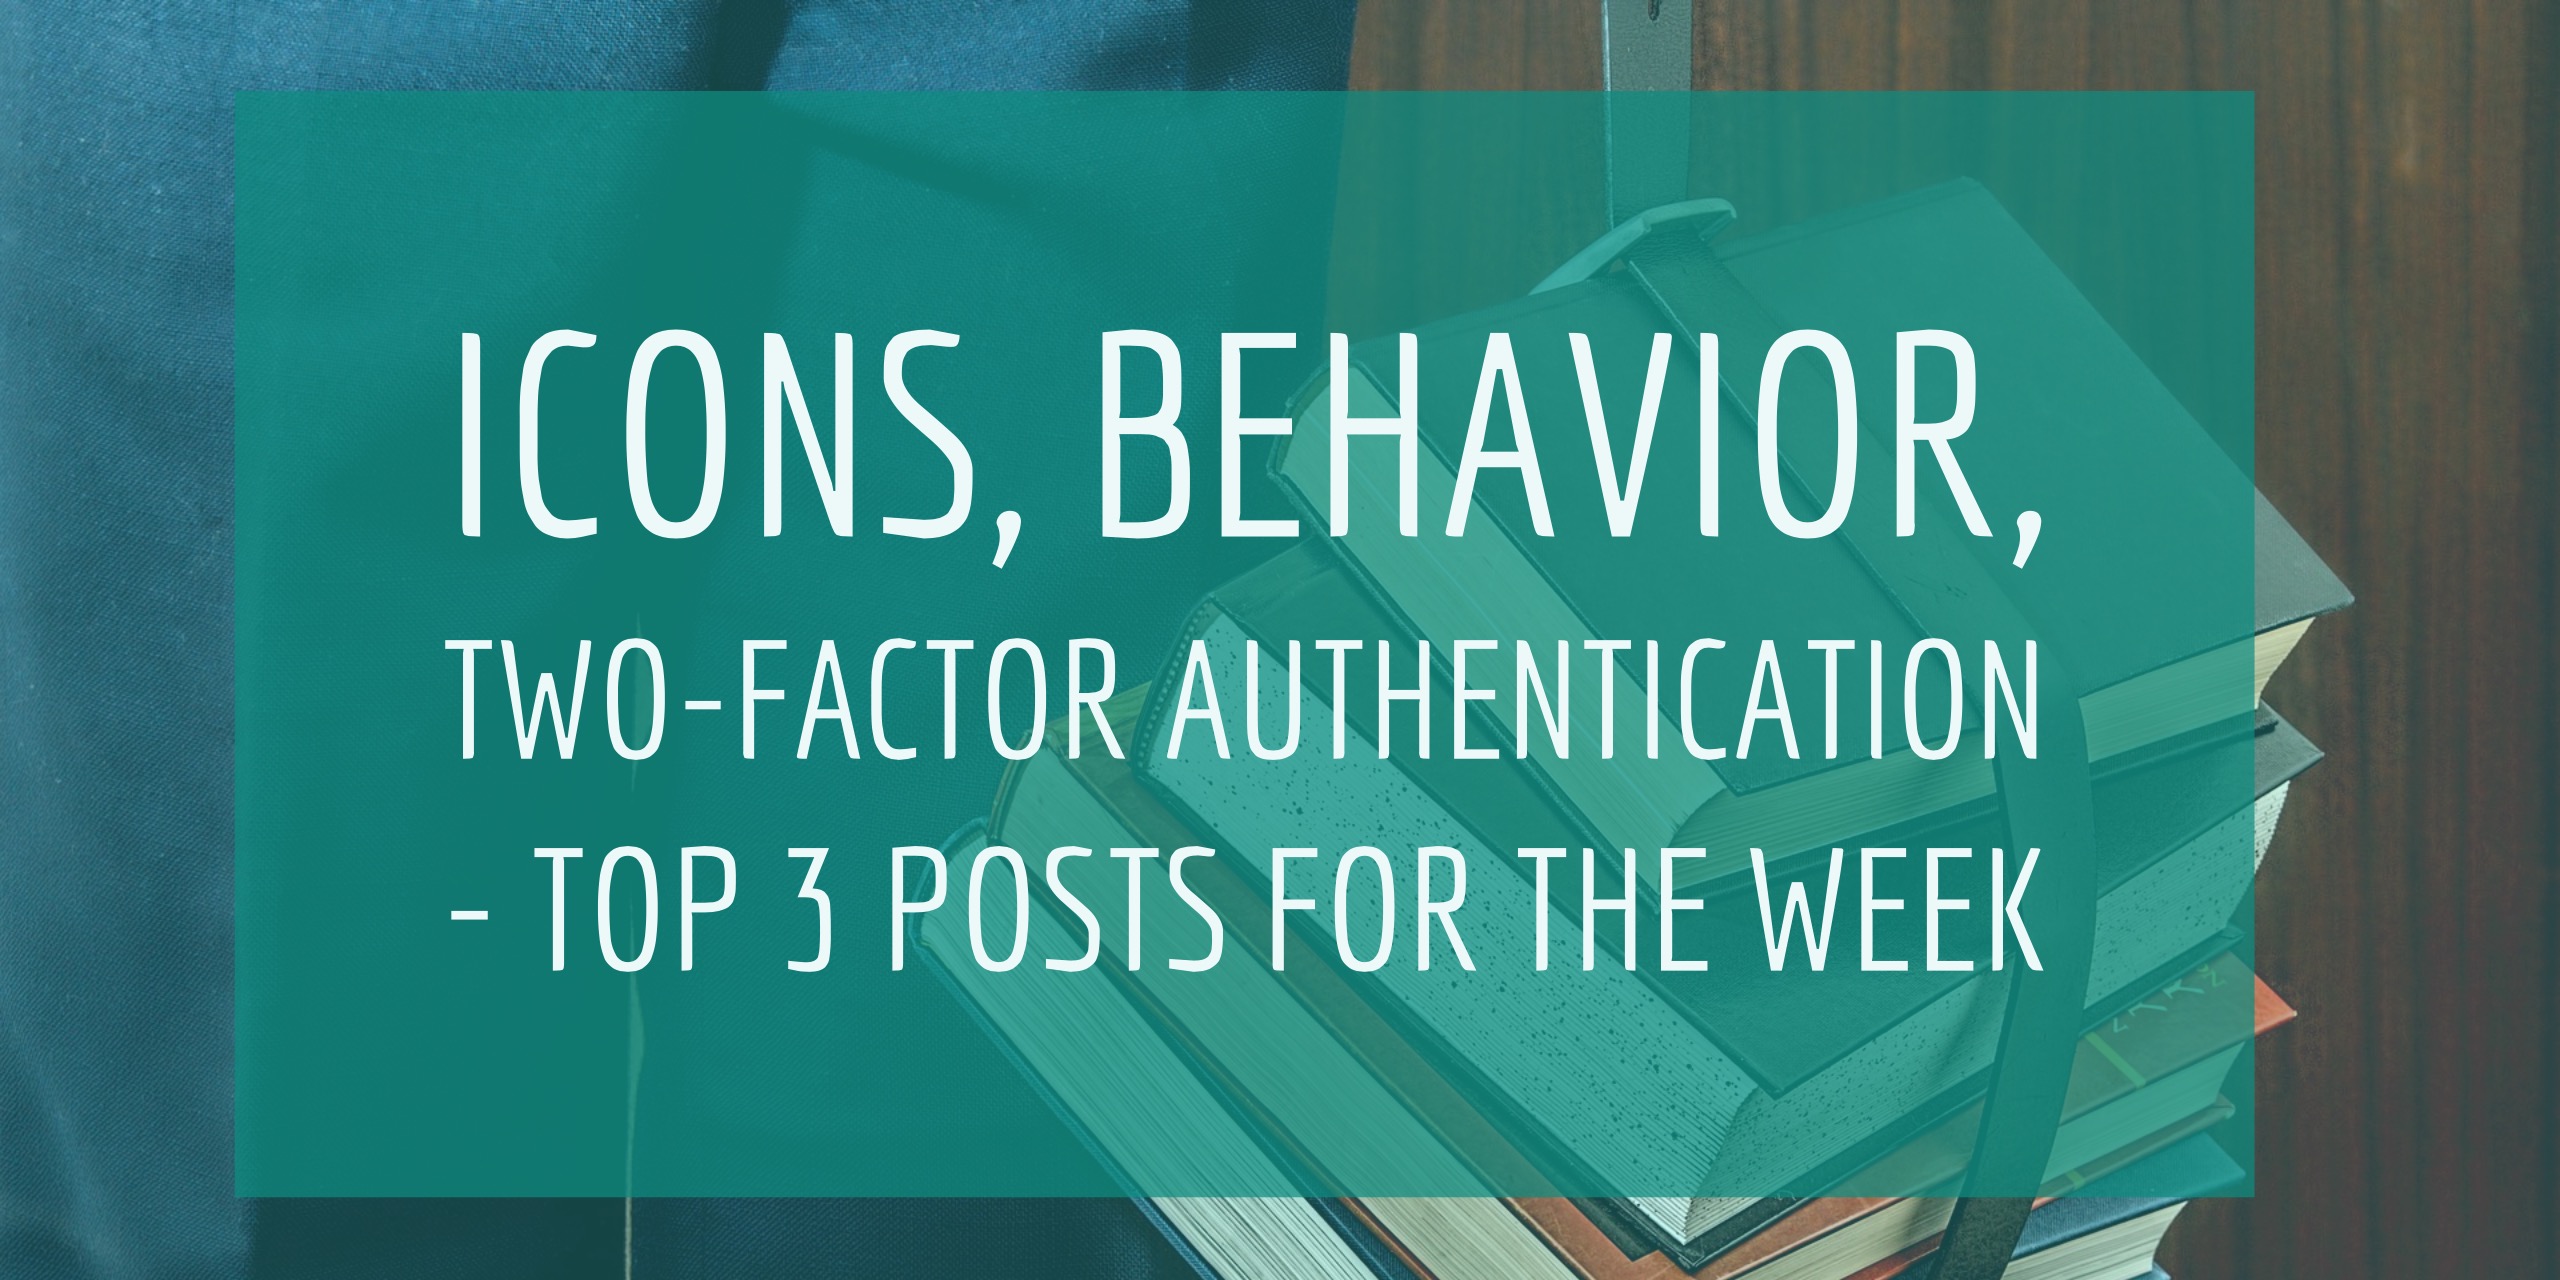 Icons, behavior, two-factor authentication – Top 3 posts for the week